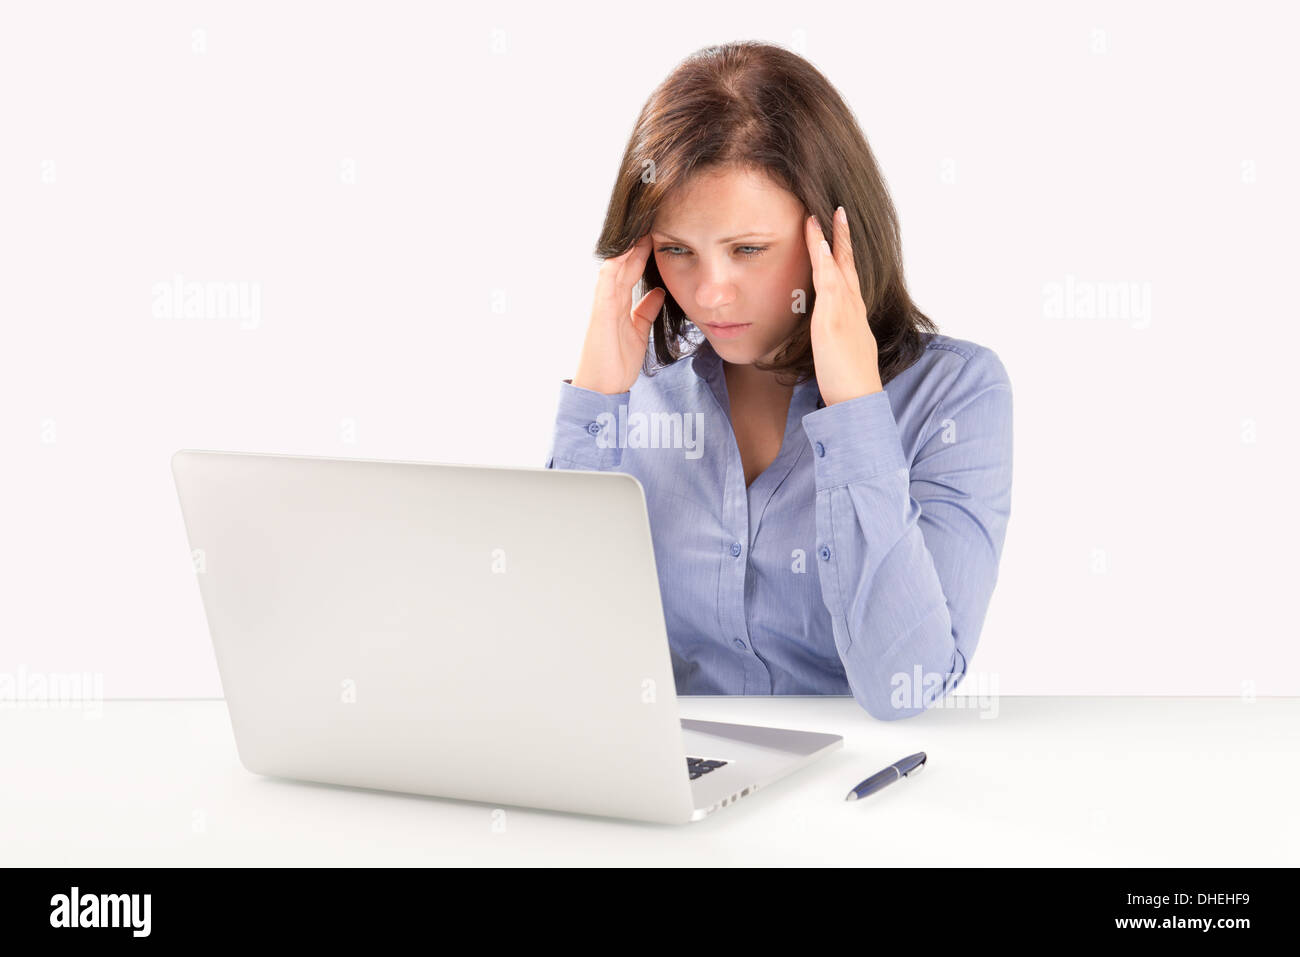 Business woman is sitting in front of a modern laptop and holding hands behind her head, business concept Stock Photo